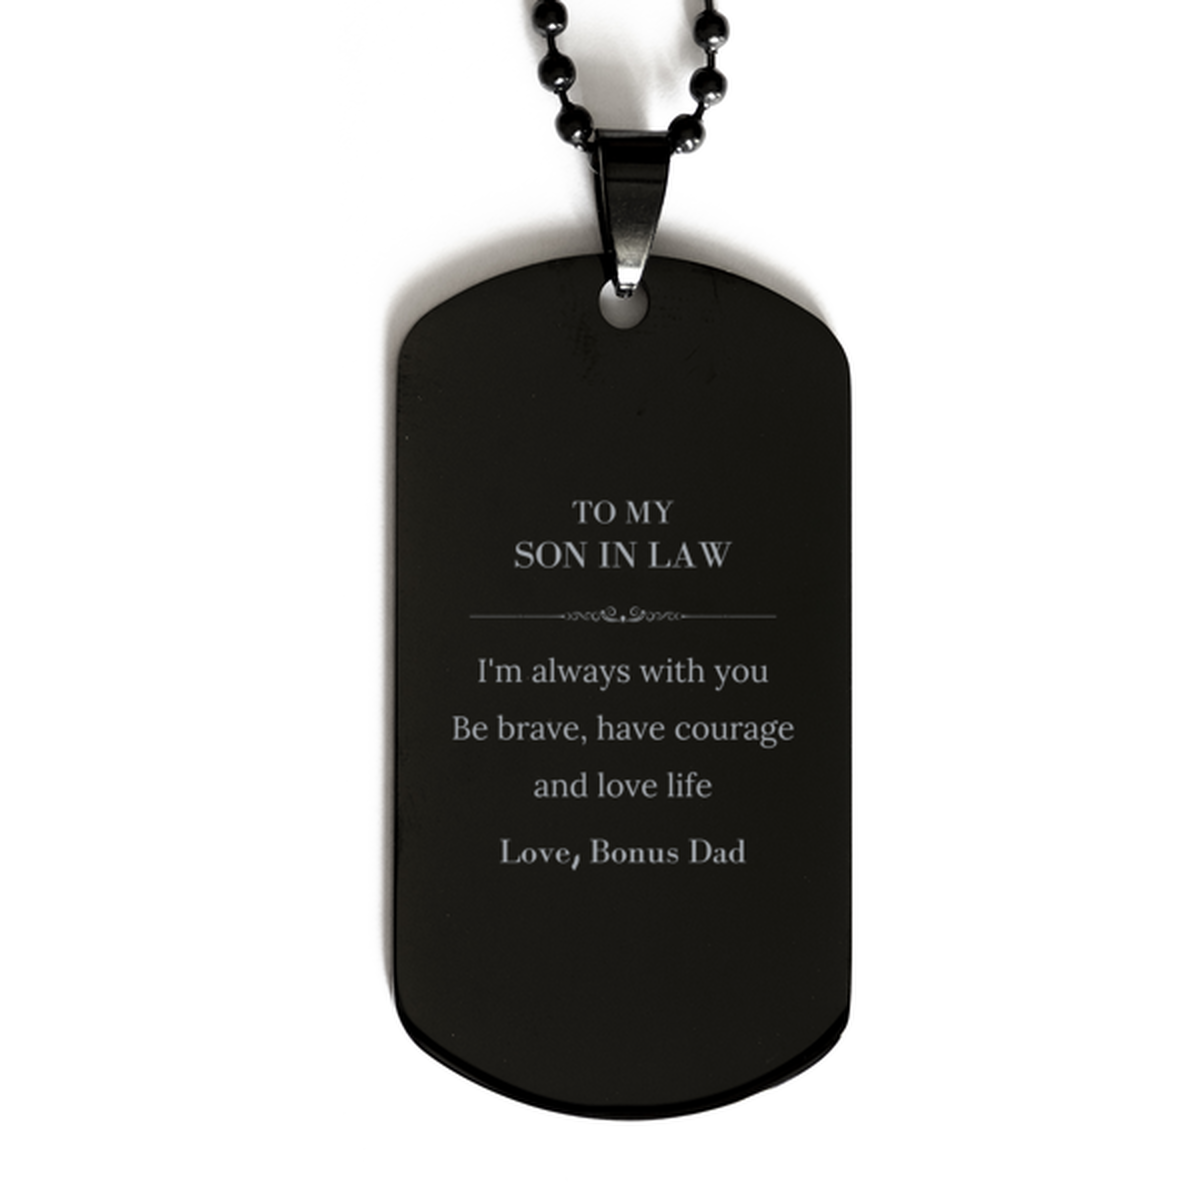 To My Son In Law Gifts from Bonus Dad, Unique Black Dog Tag Inspirational Christmas Birthday Graduation Gifts for Son In Law I'm always with you. Be brave, have courage and love life. Love, Bonus Dad